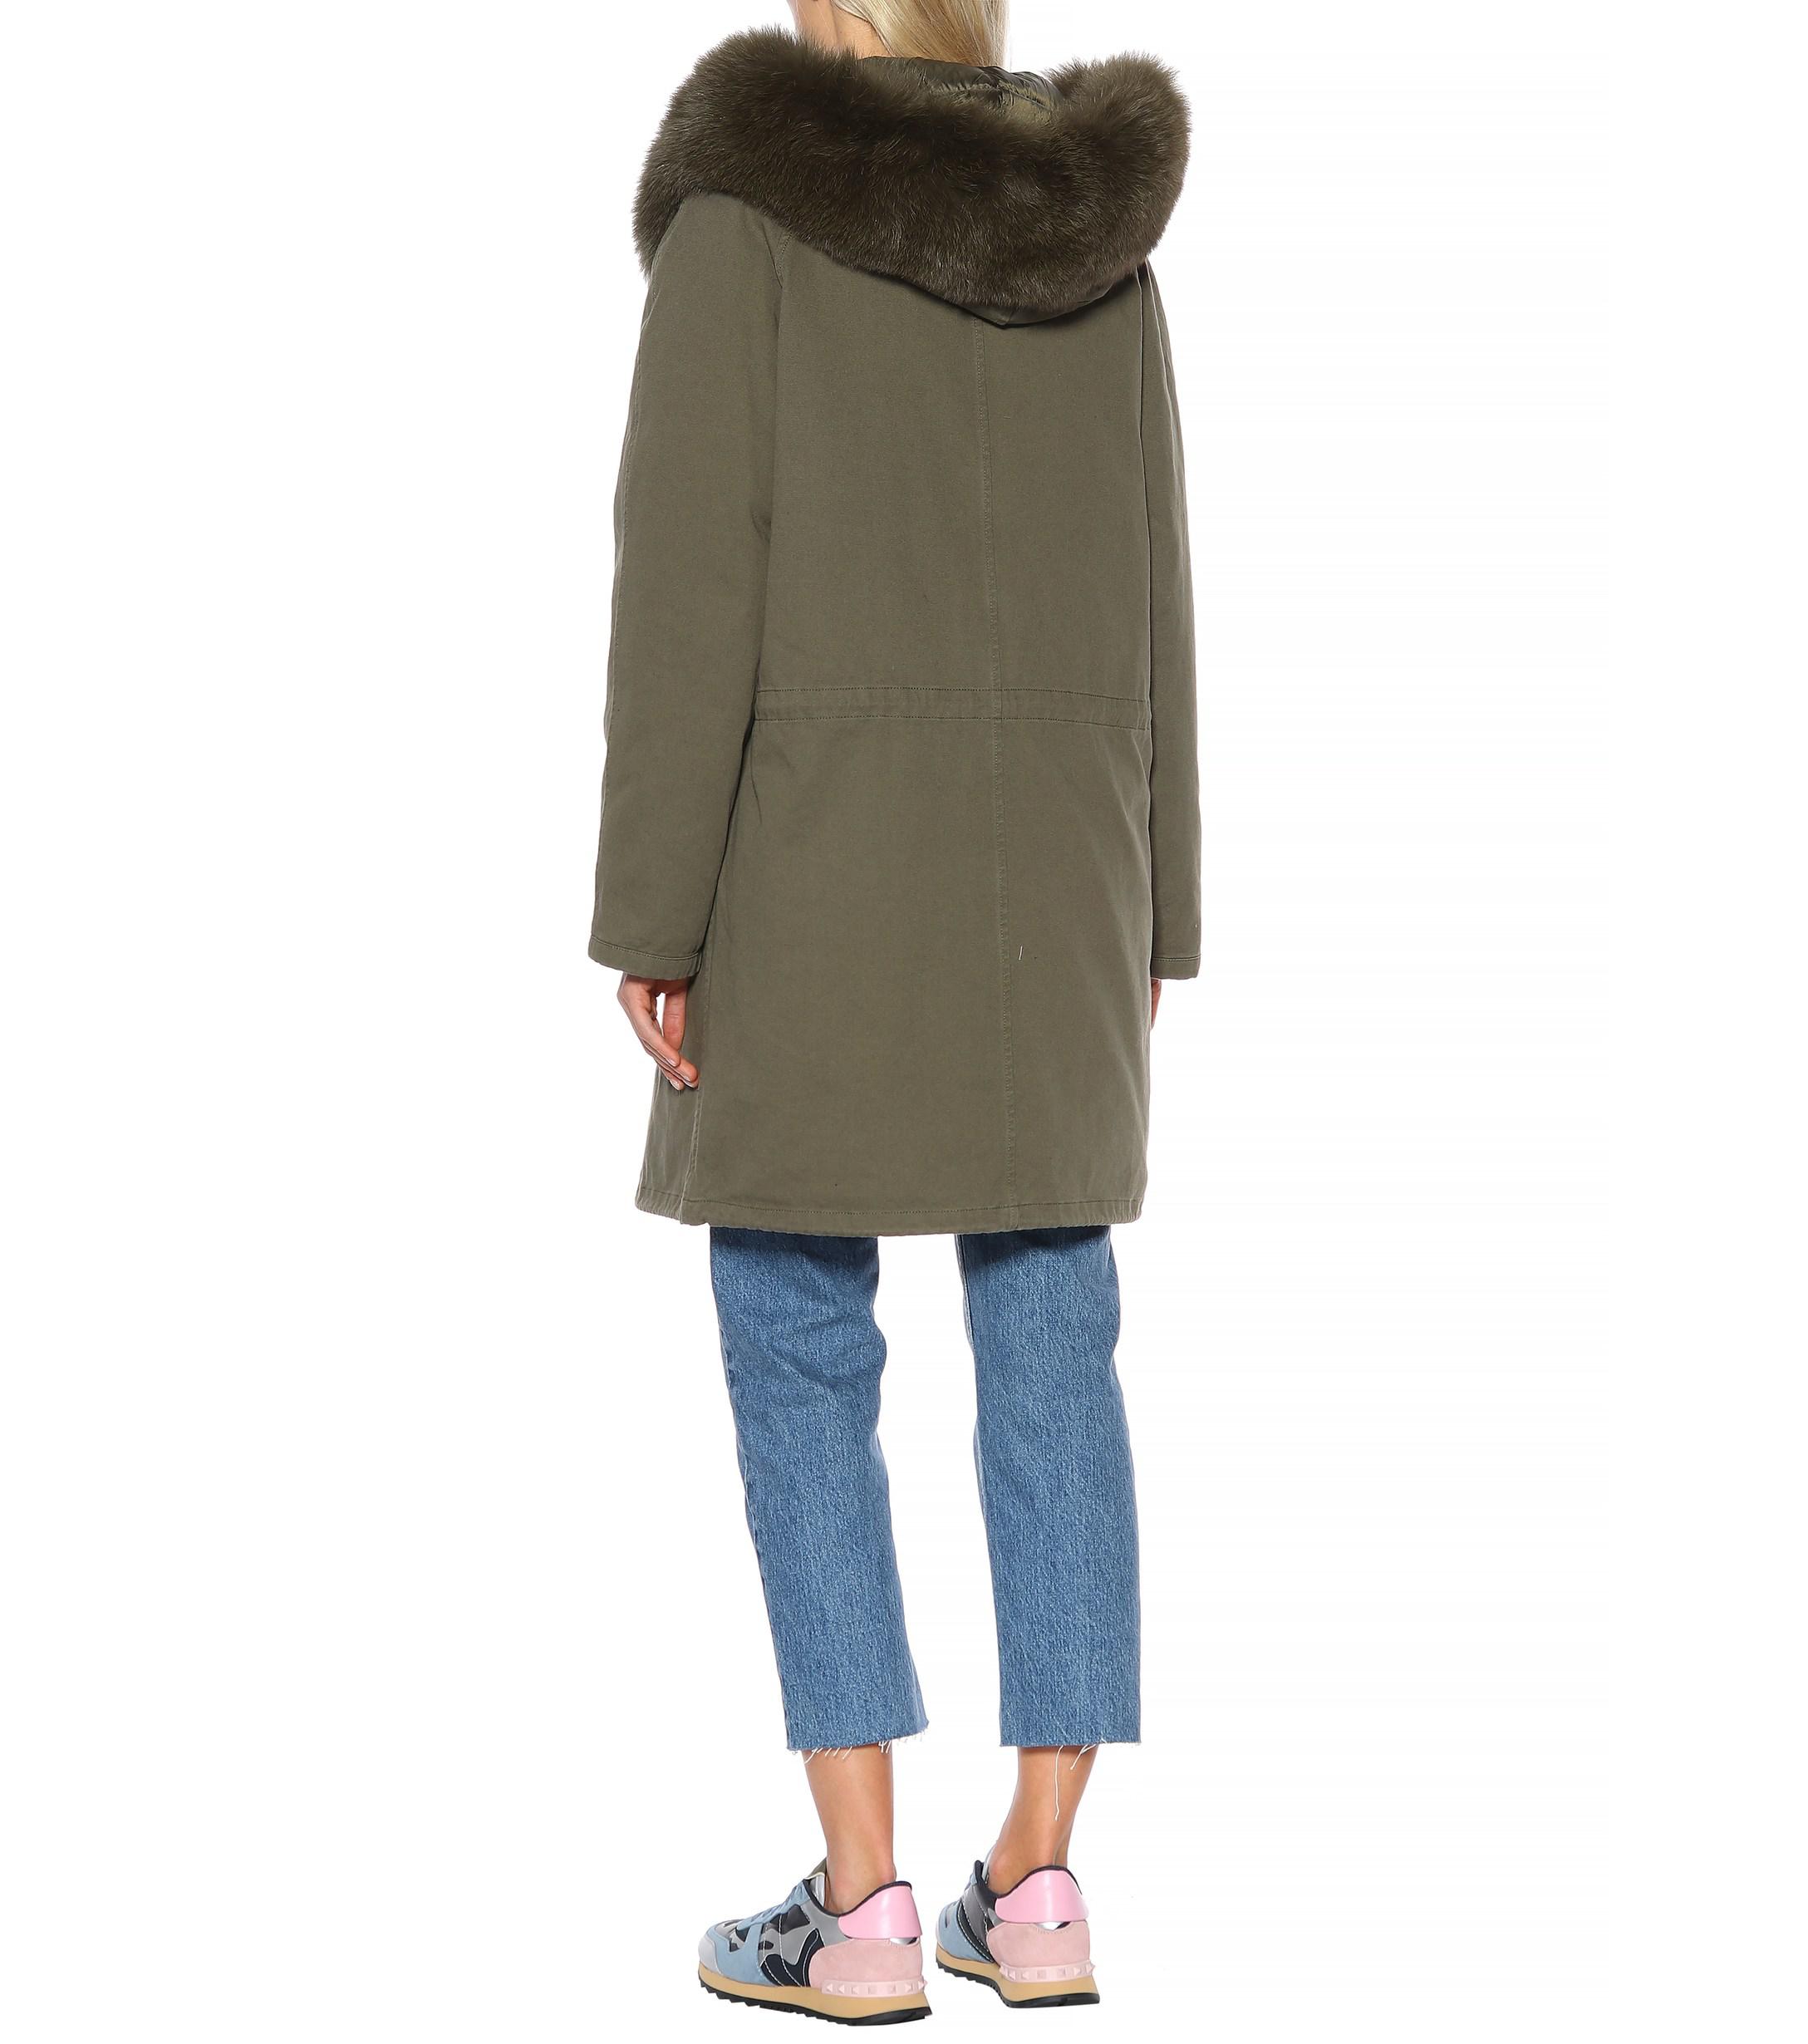 Army by Yves Salomon Fur-trimmed Cotton Parka Coat in Green - Lyst